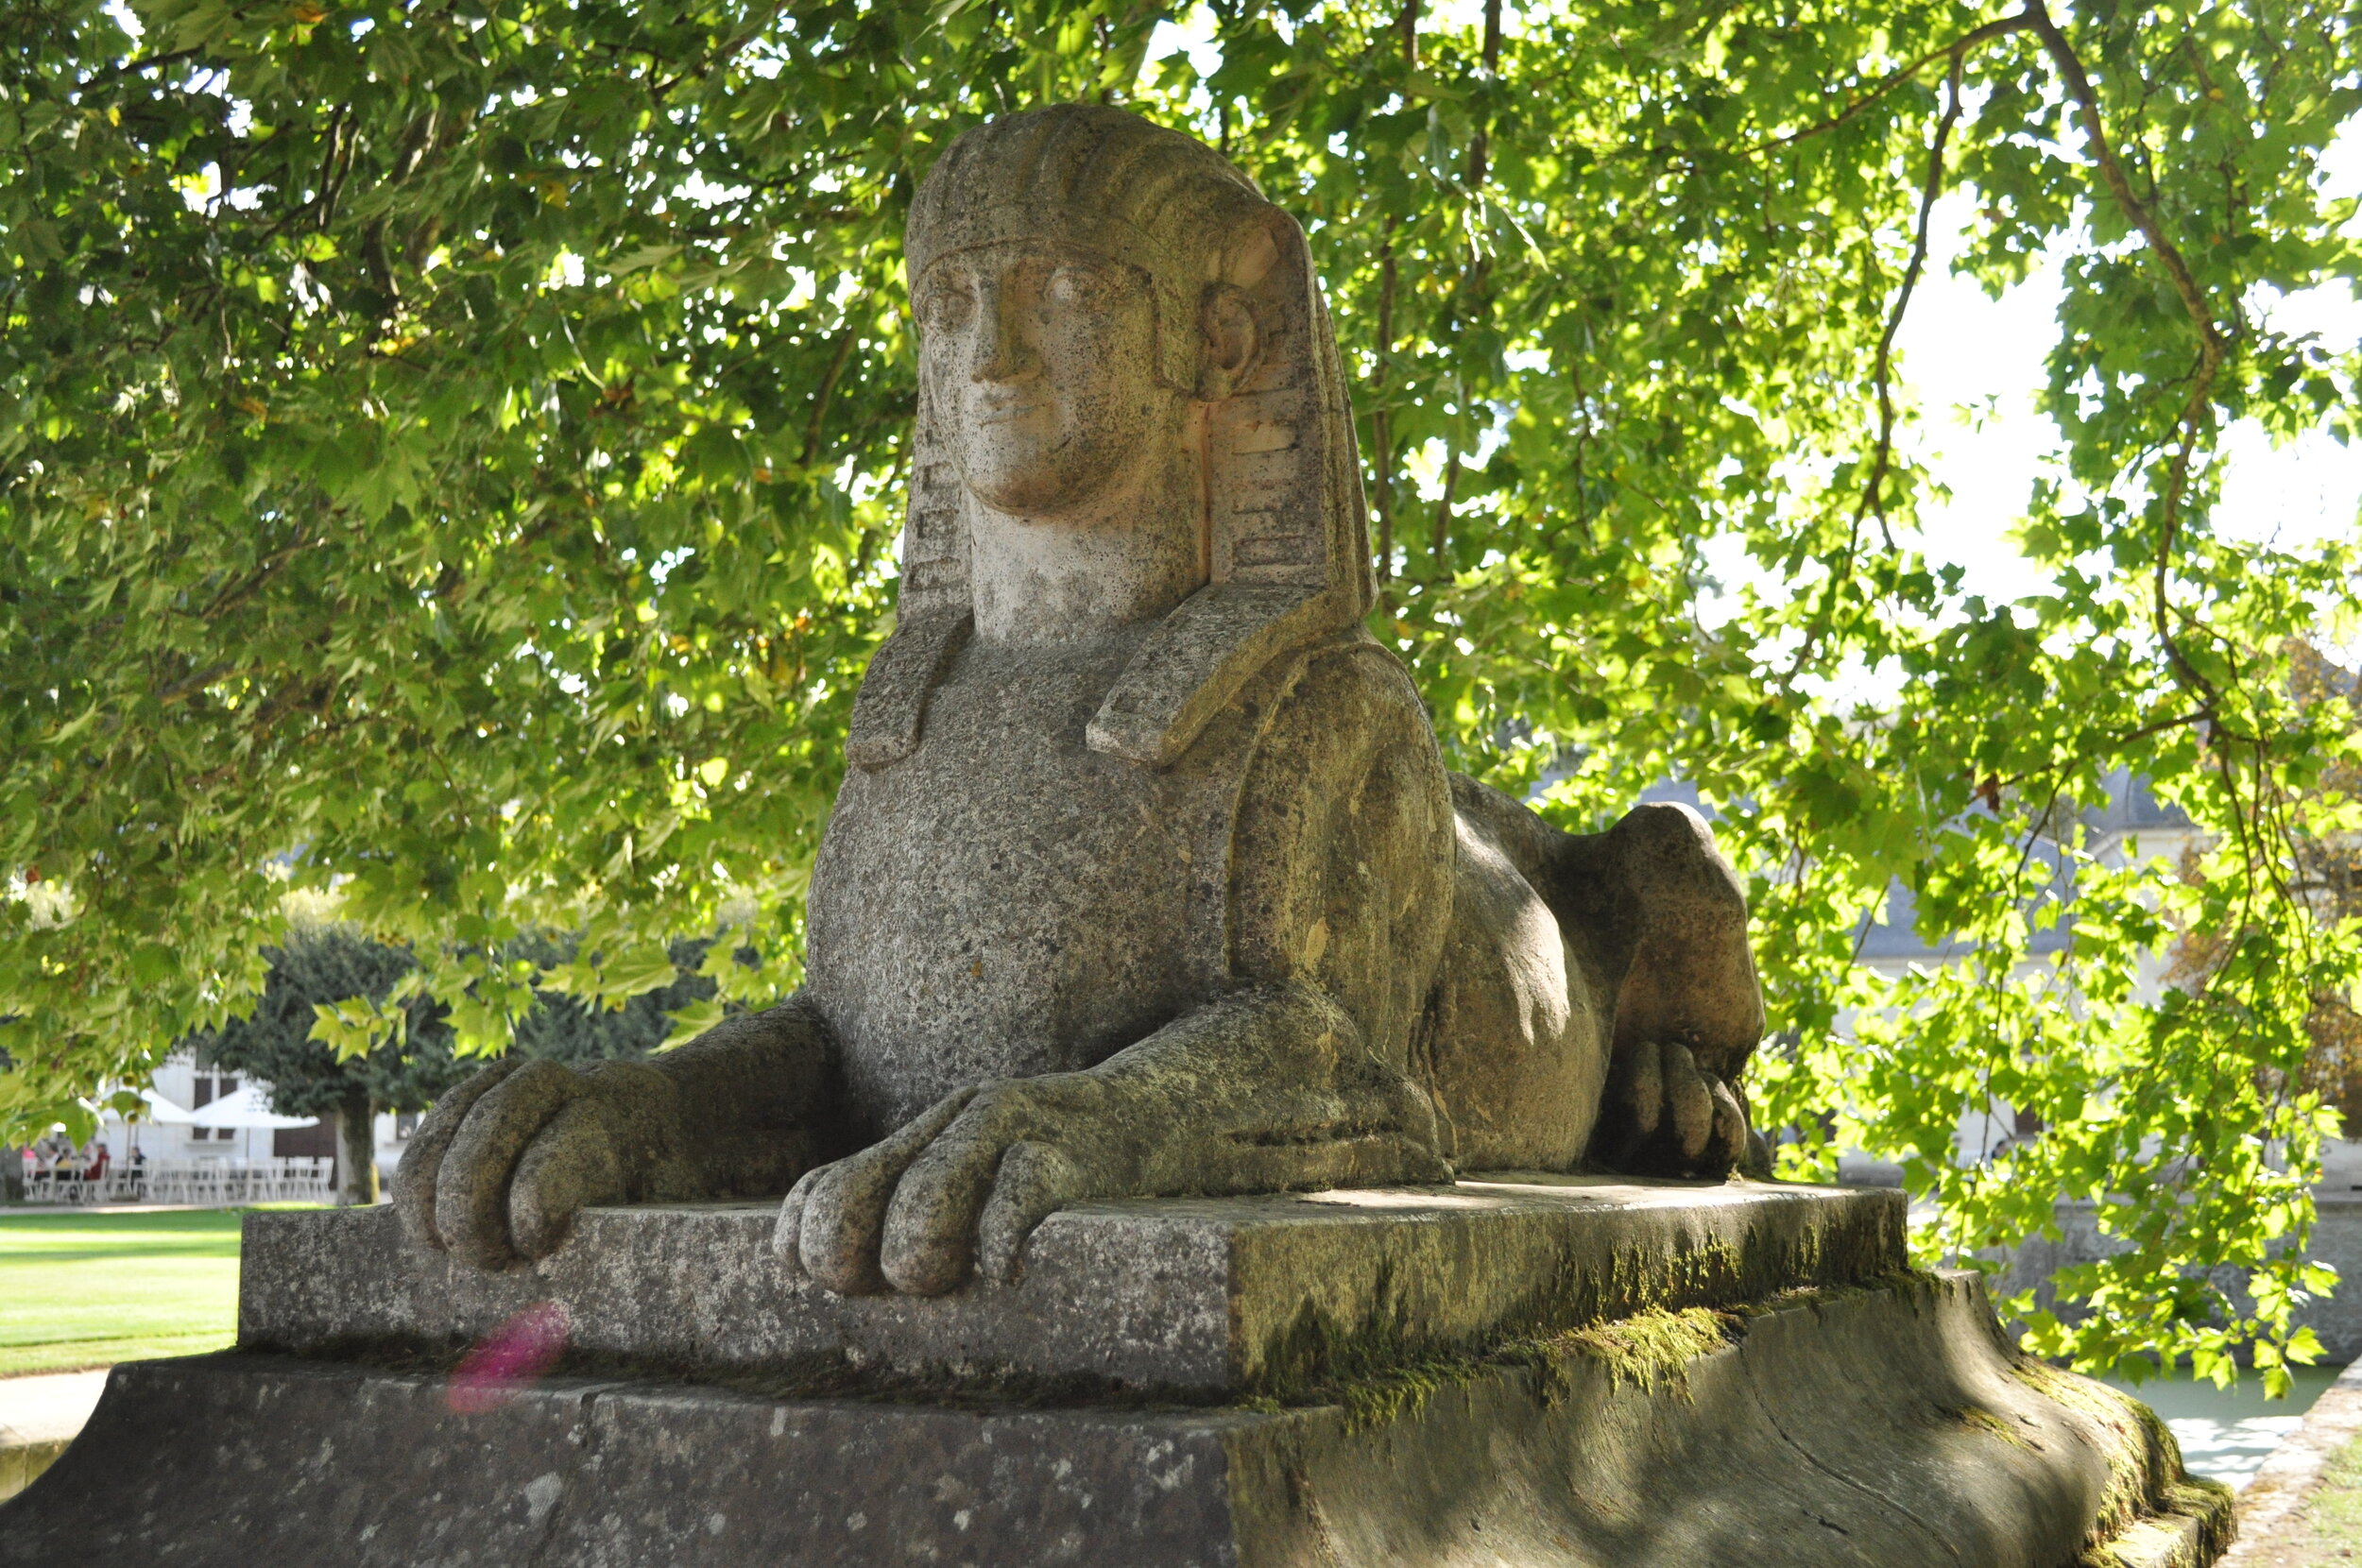 A sphinx guards the entrance to Chenonceau